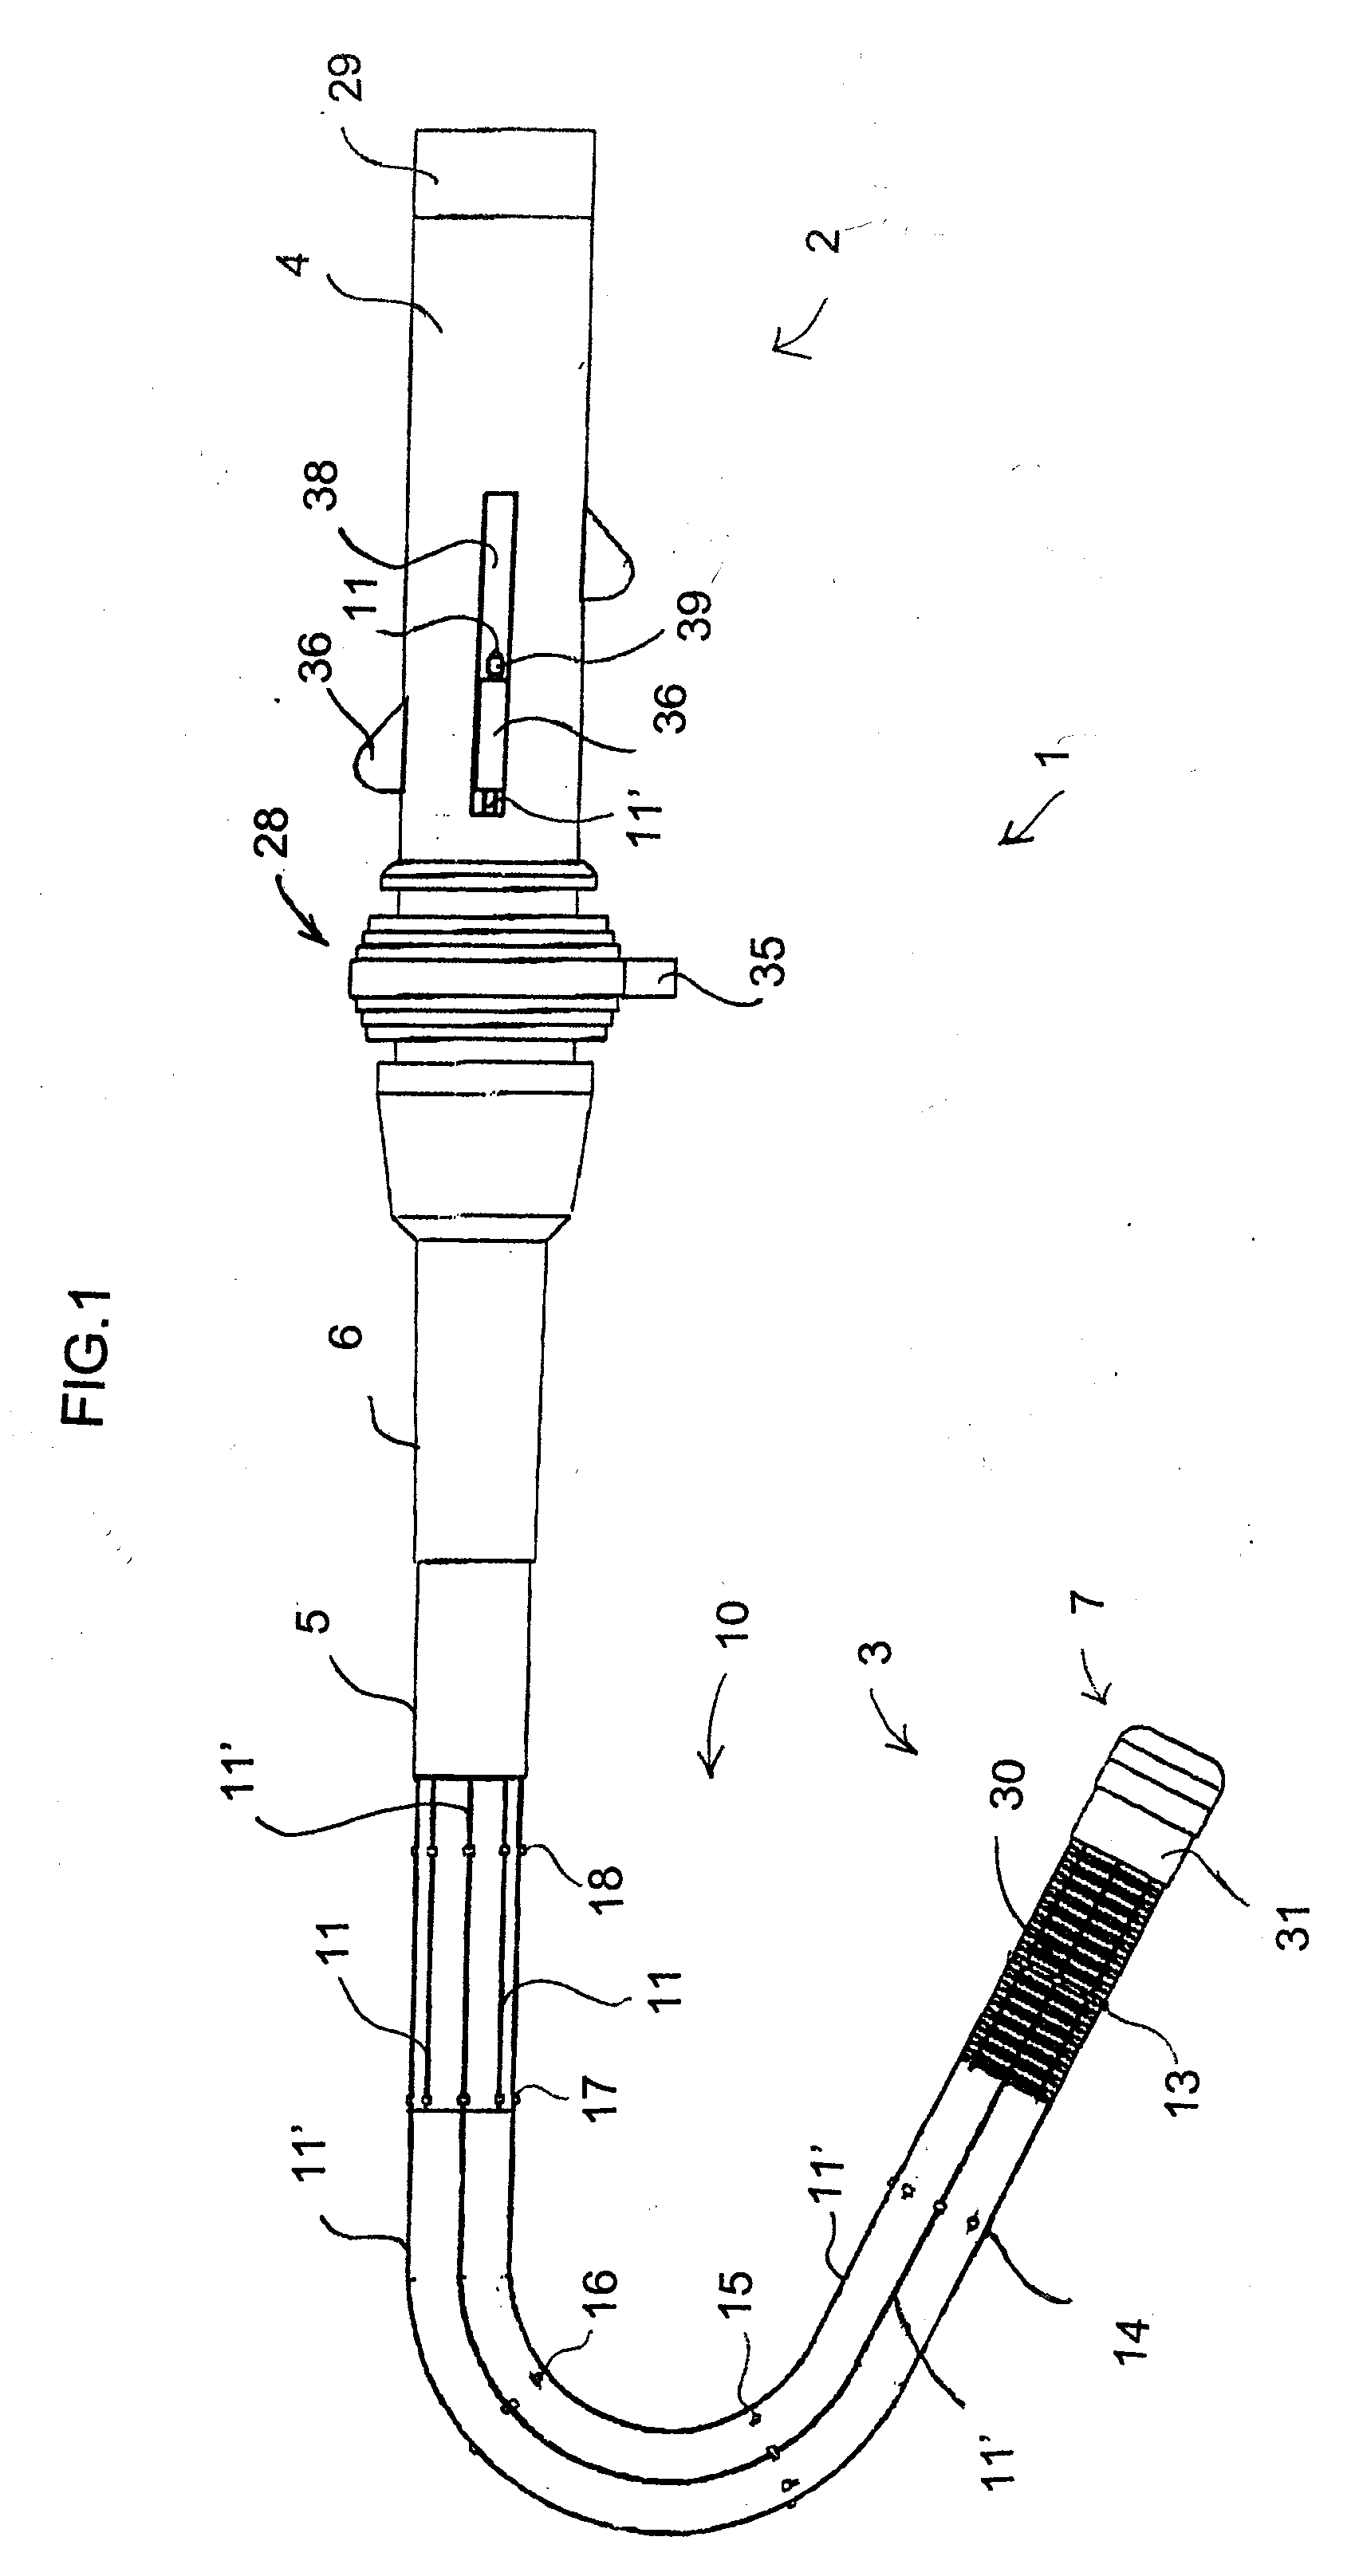 Torque-Transmitting, Variably-Flexible, Corrugated Insertion Device and Method for Transmitting Torque and Variably Flexing a Corrugated Insertion Device